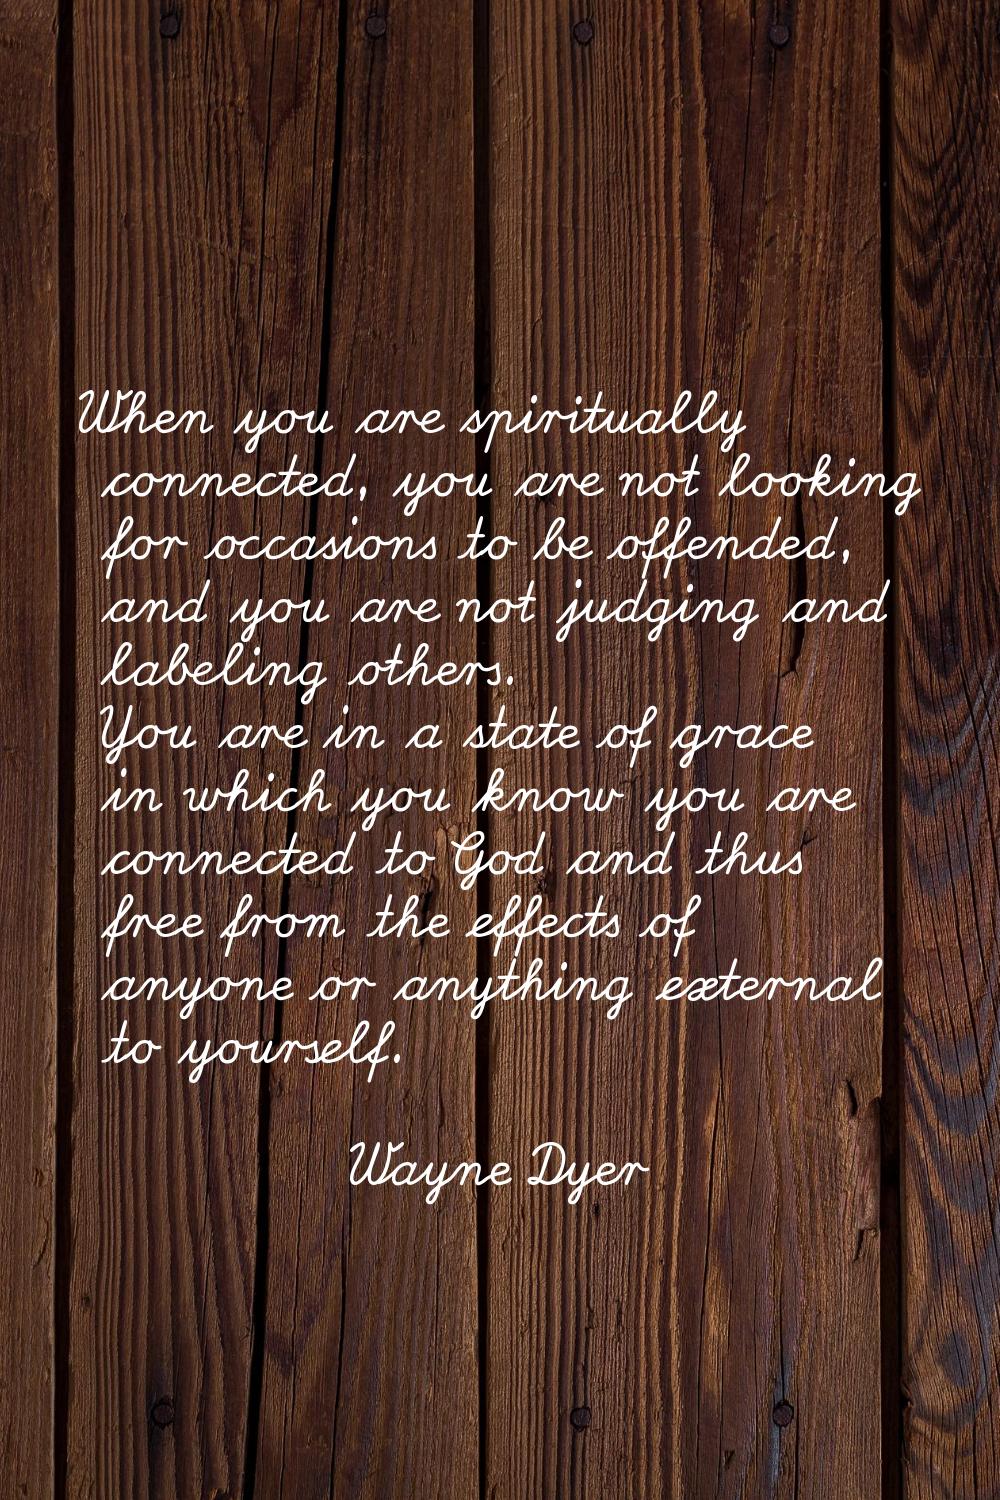 When you are spiritually connected, you are not looking for occasions to be offended, and you are n